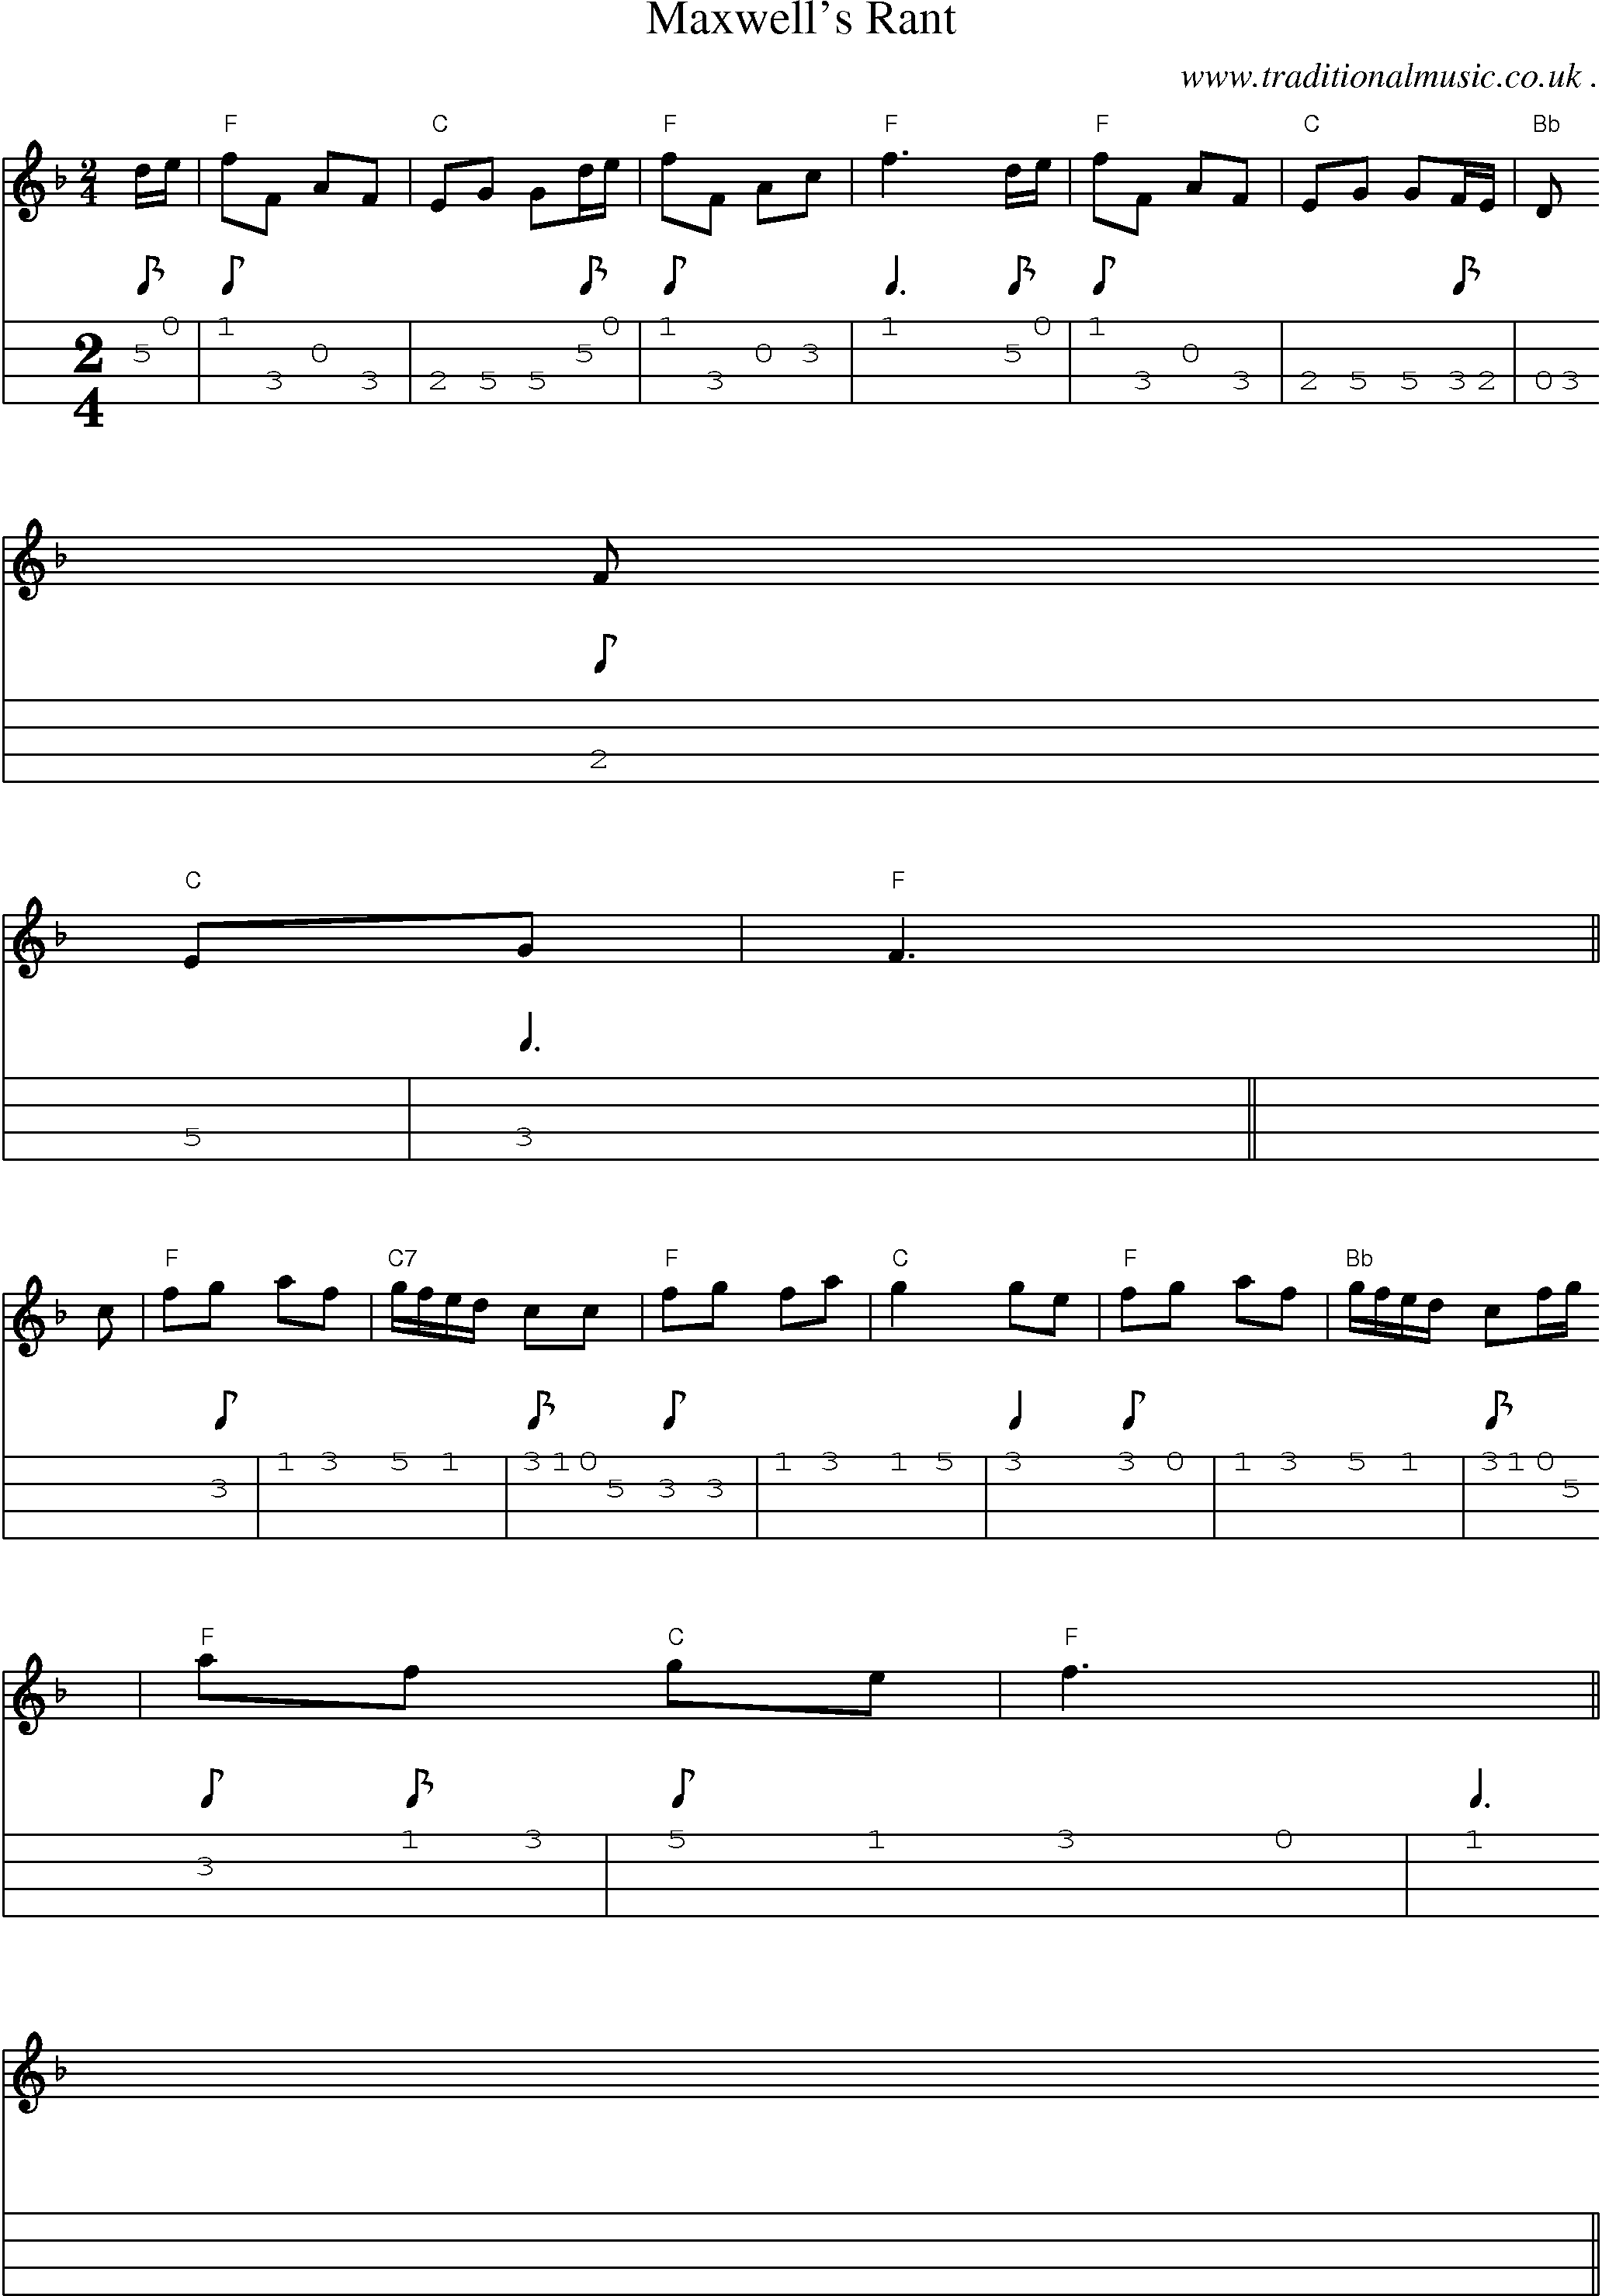 Sheet-music  score, Chords and Mandolin Tabs for Maxwells Rant